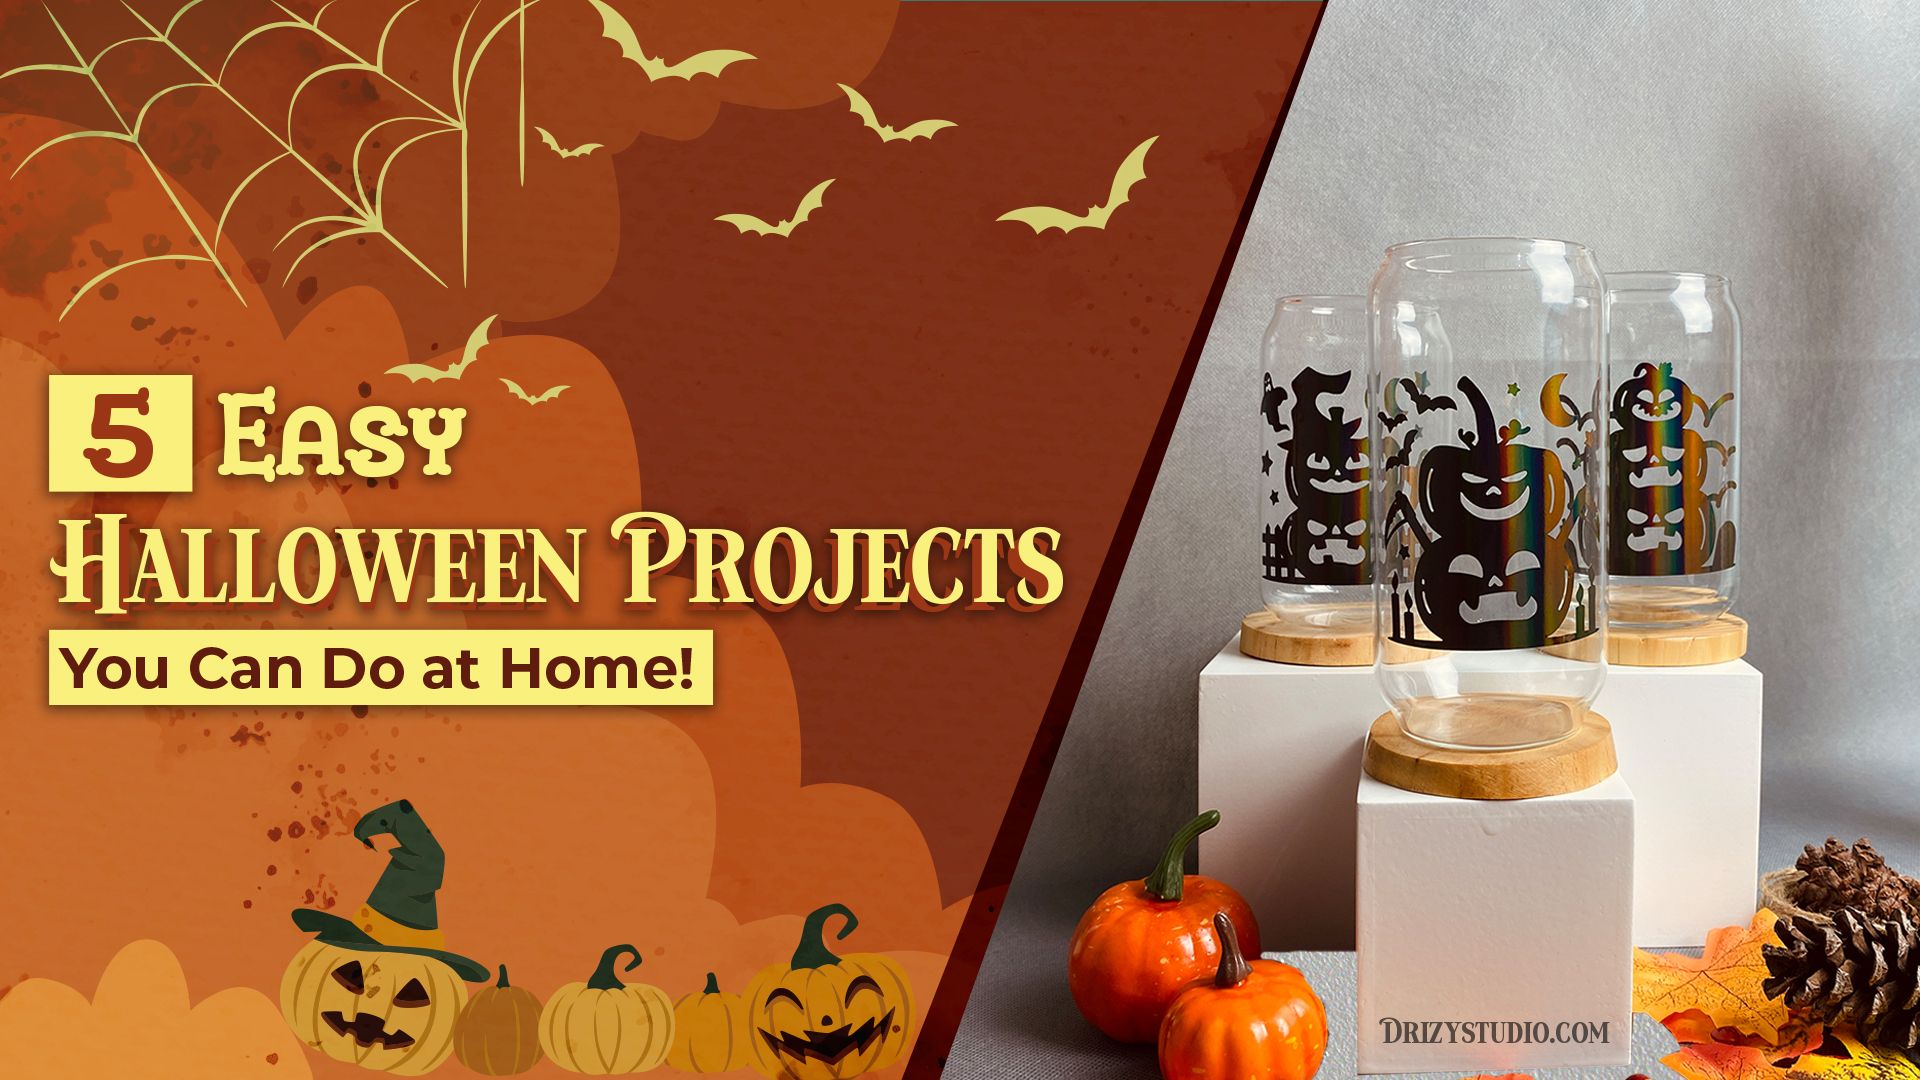 5 Easy Halloween Projects You Can Do at Home!